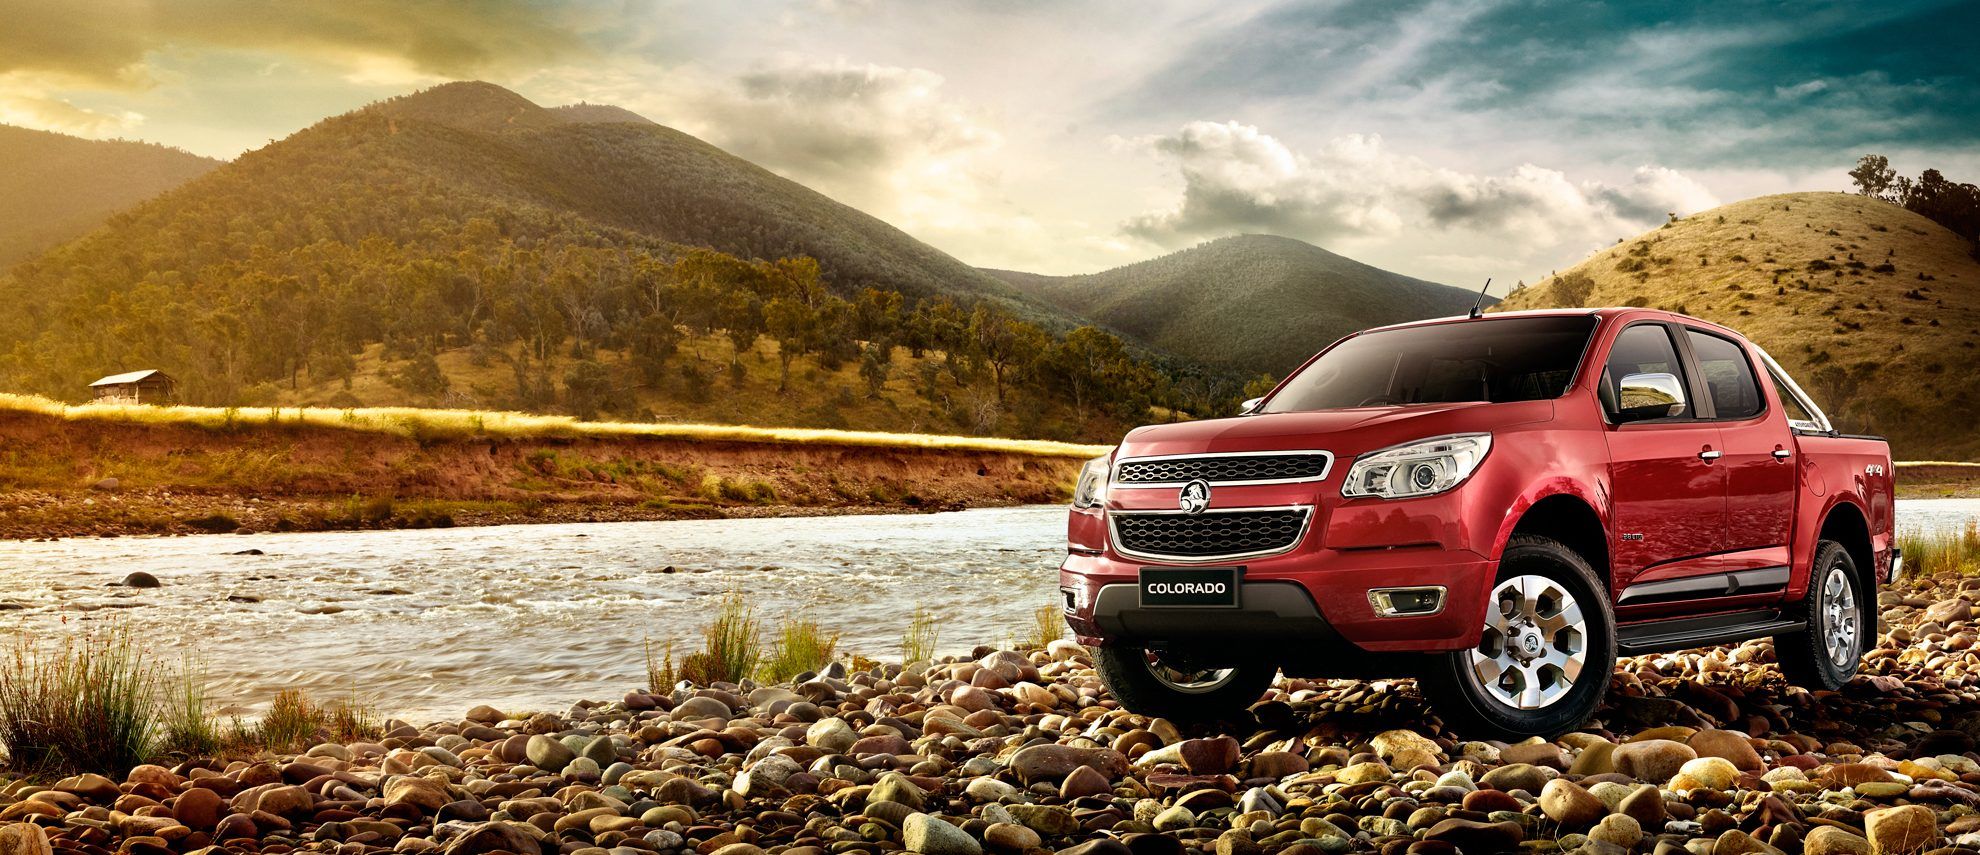 The all new Holden Colorado has arrived at our Sydney Holden dealership.